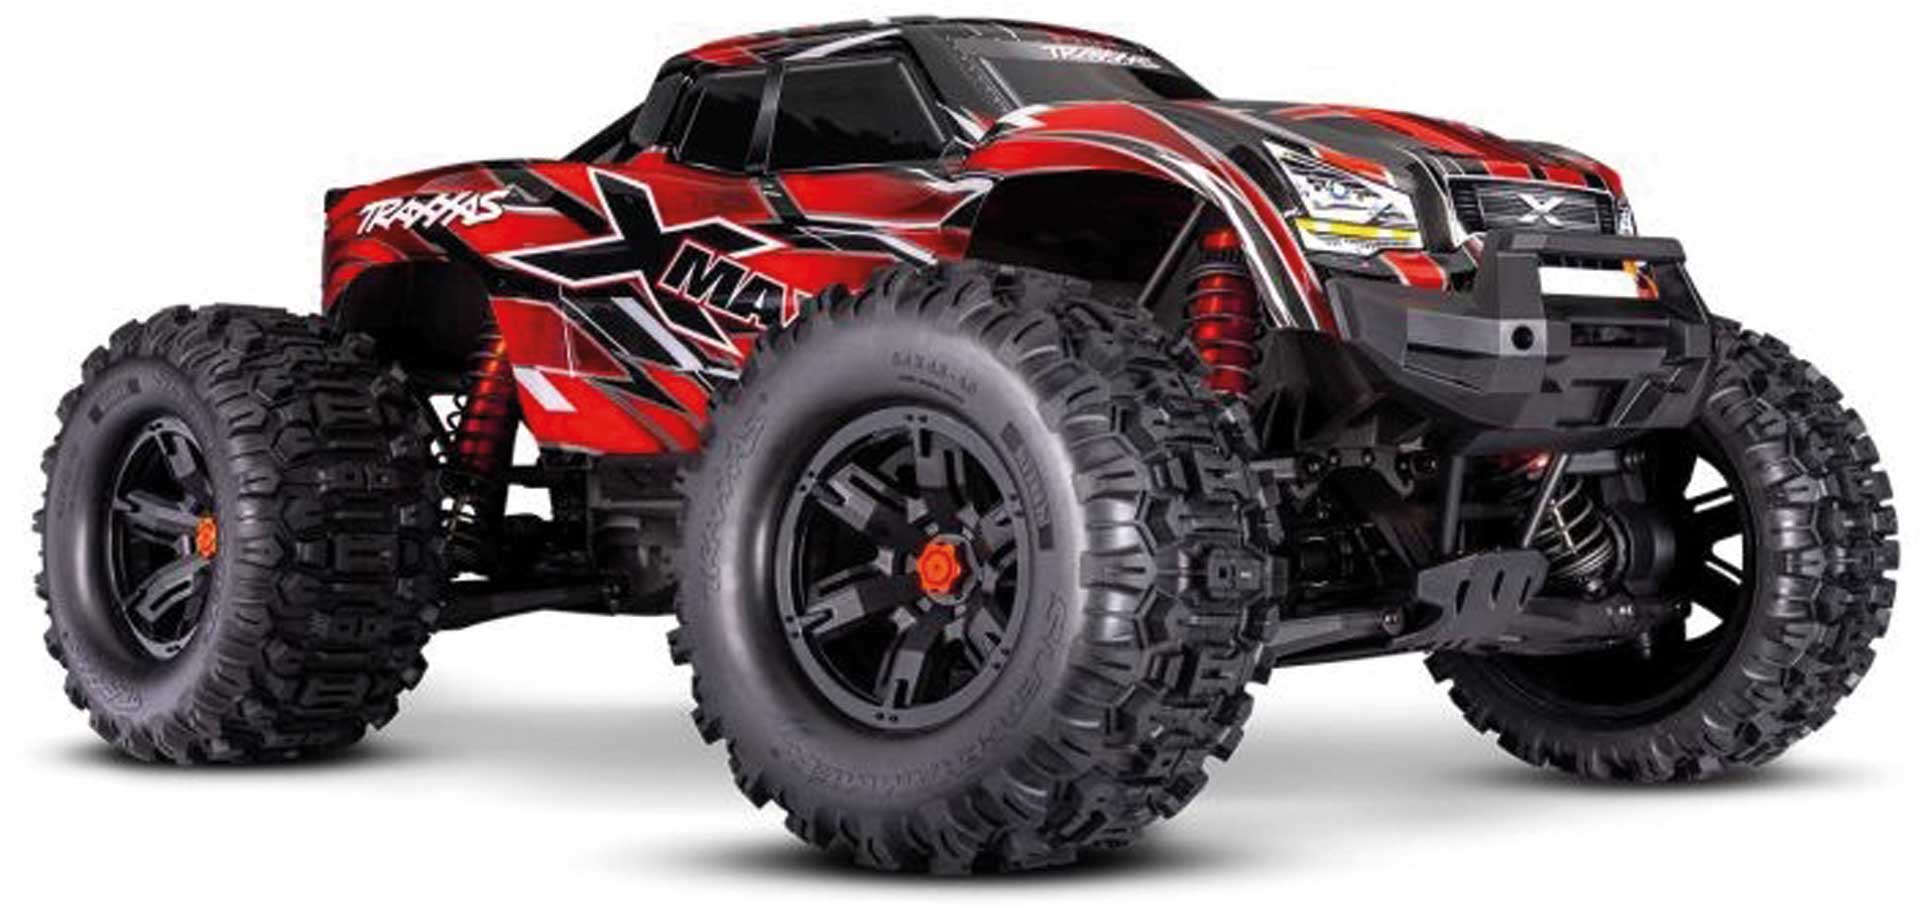 TRAXXAS X-MAXX 4X4 VXL 8S ROUGE 1/7 MONSTER-TRUCK BELTED RTR BRUSHLESS SANS ACCU NI CHARGEUR